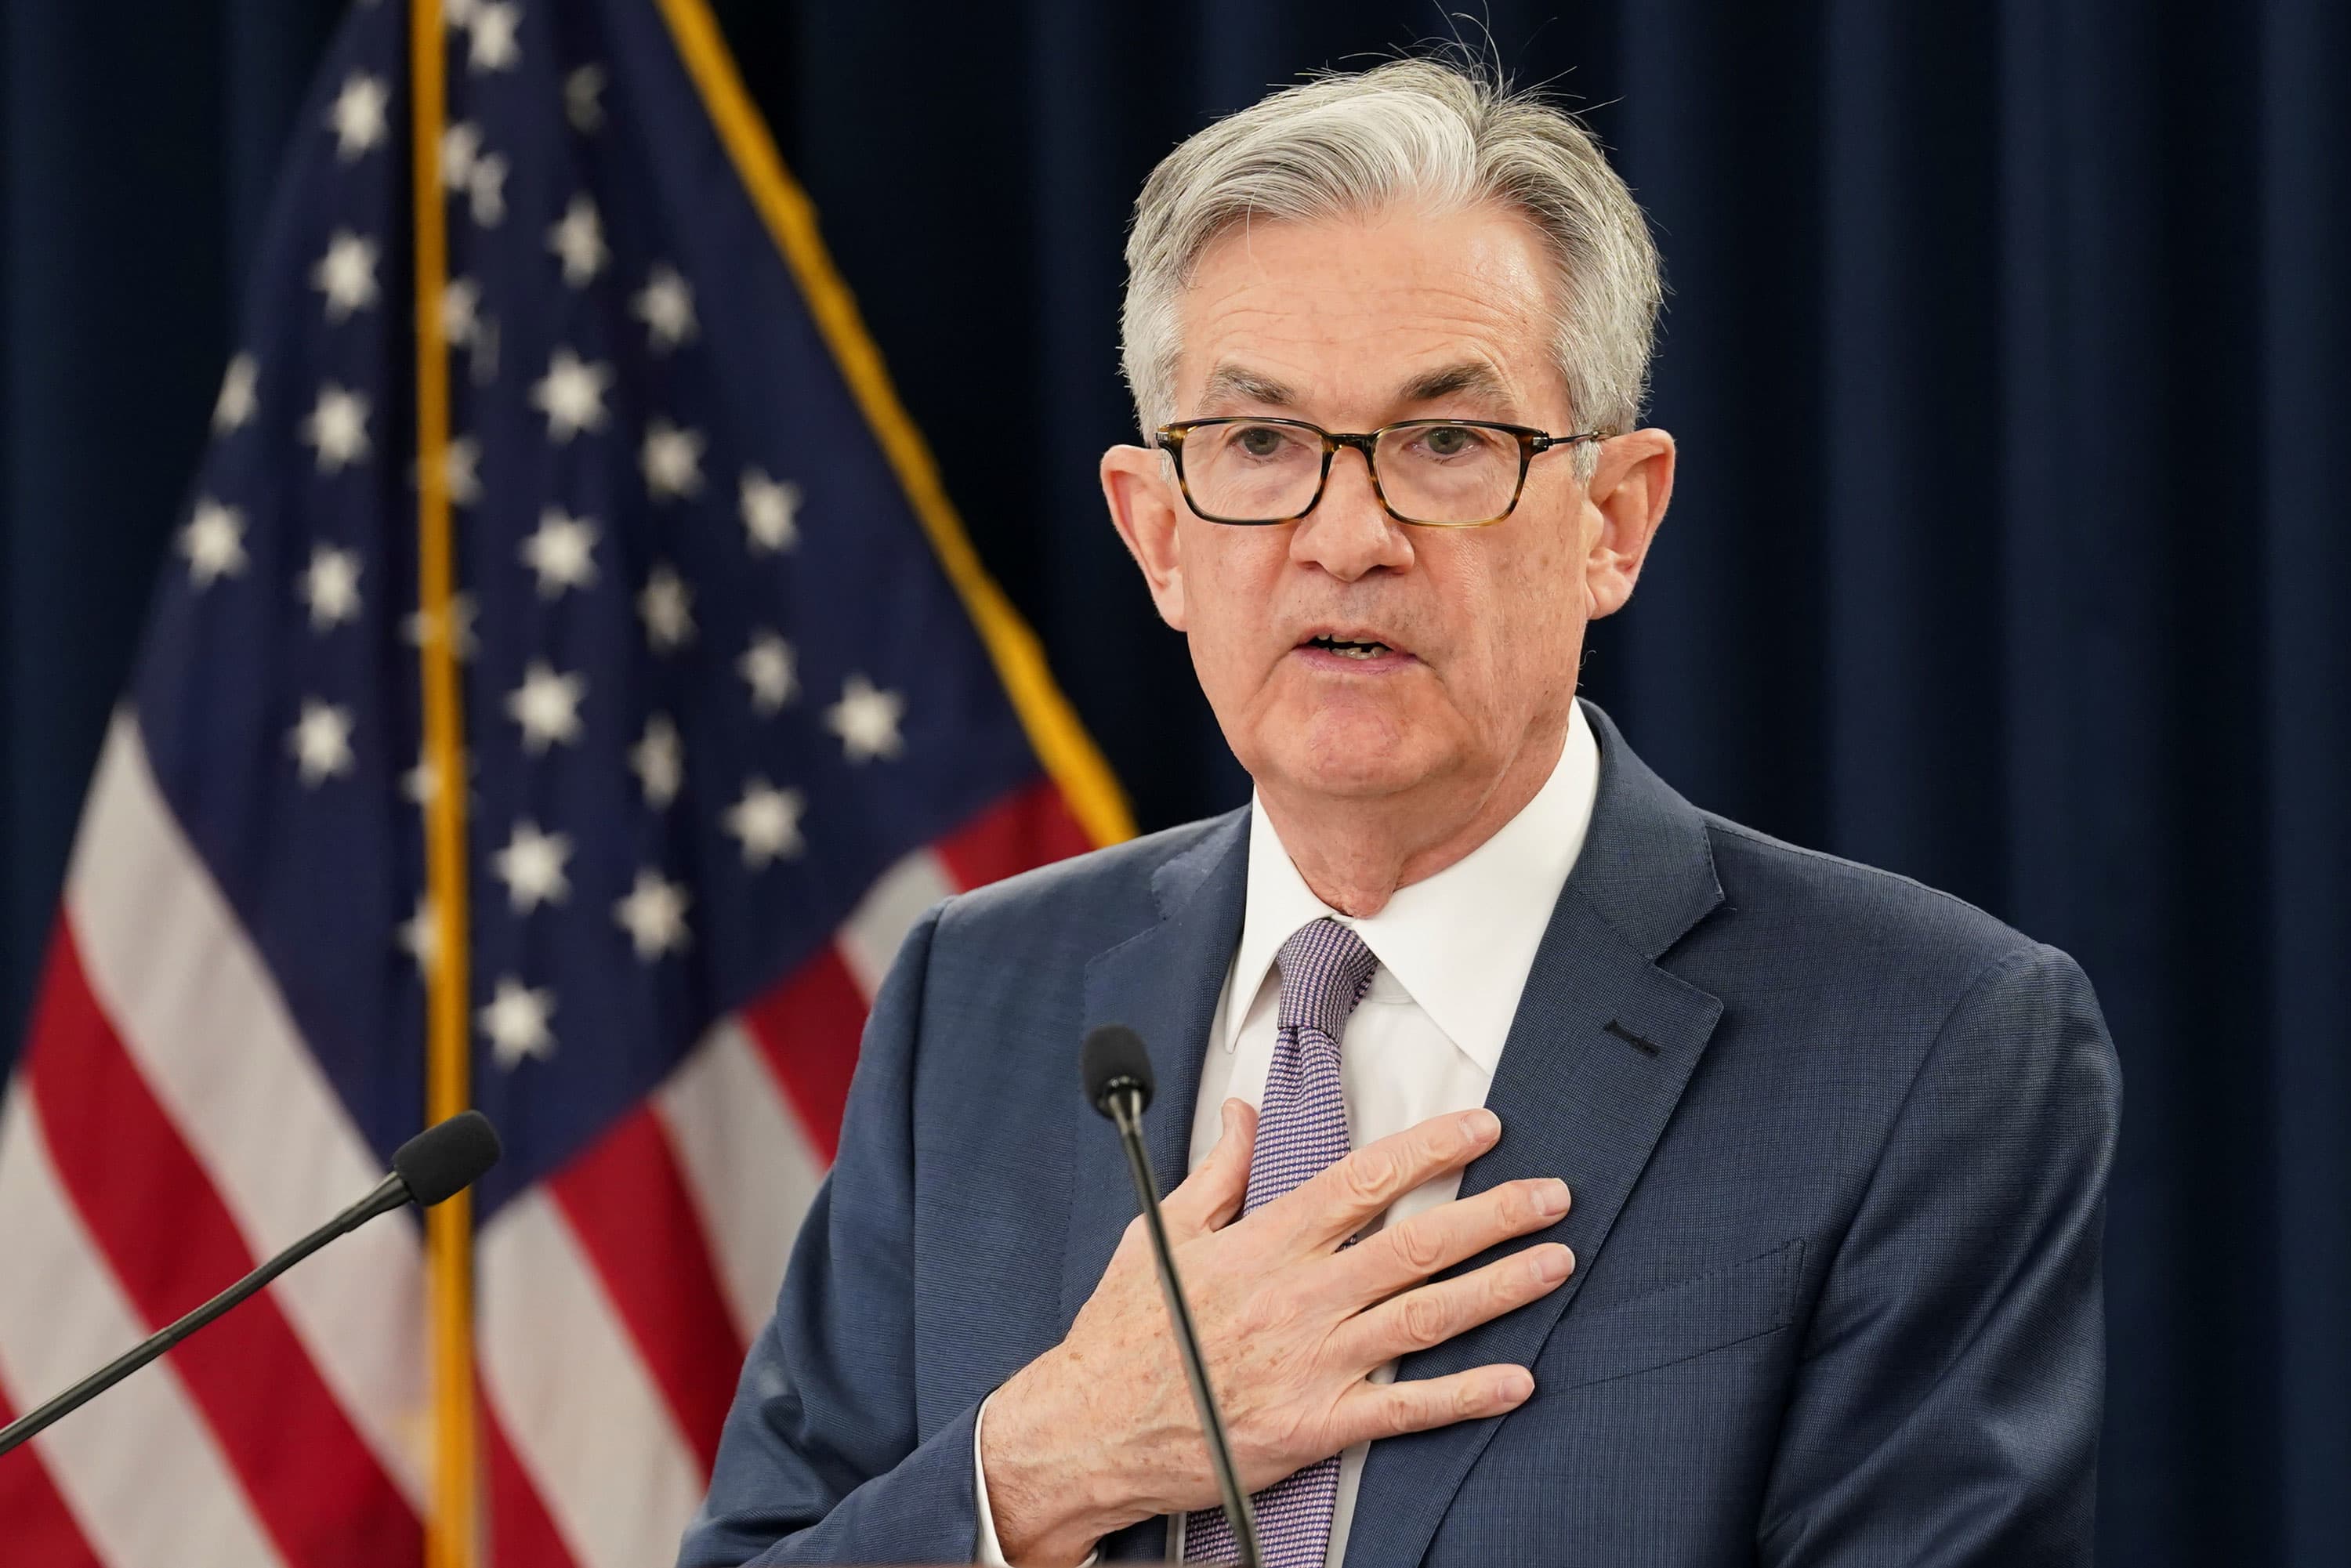 The Fed Moves Up Its Timeline For Rate Hikes As Inflation Rises